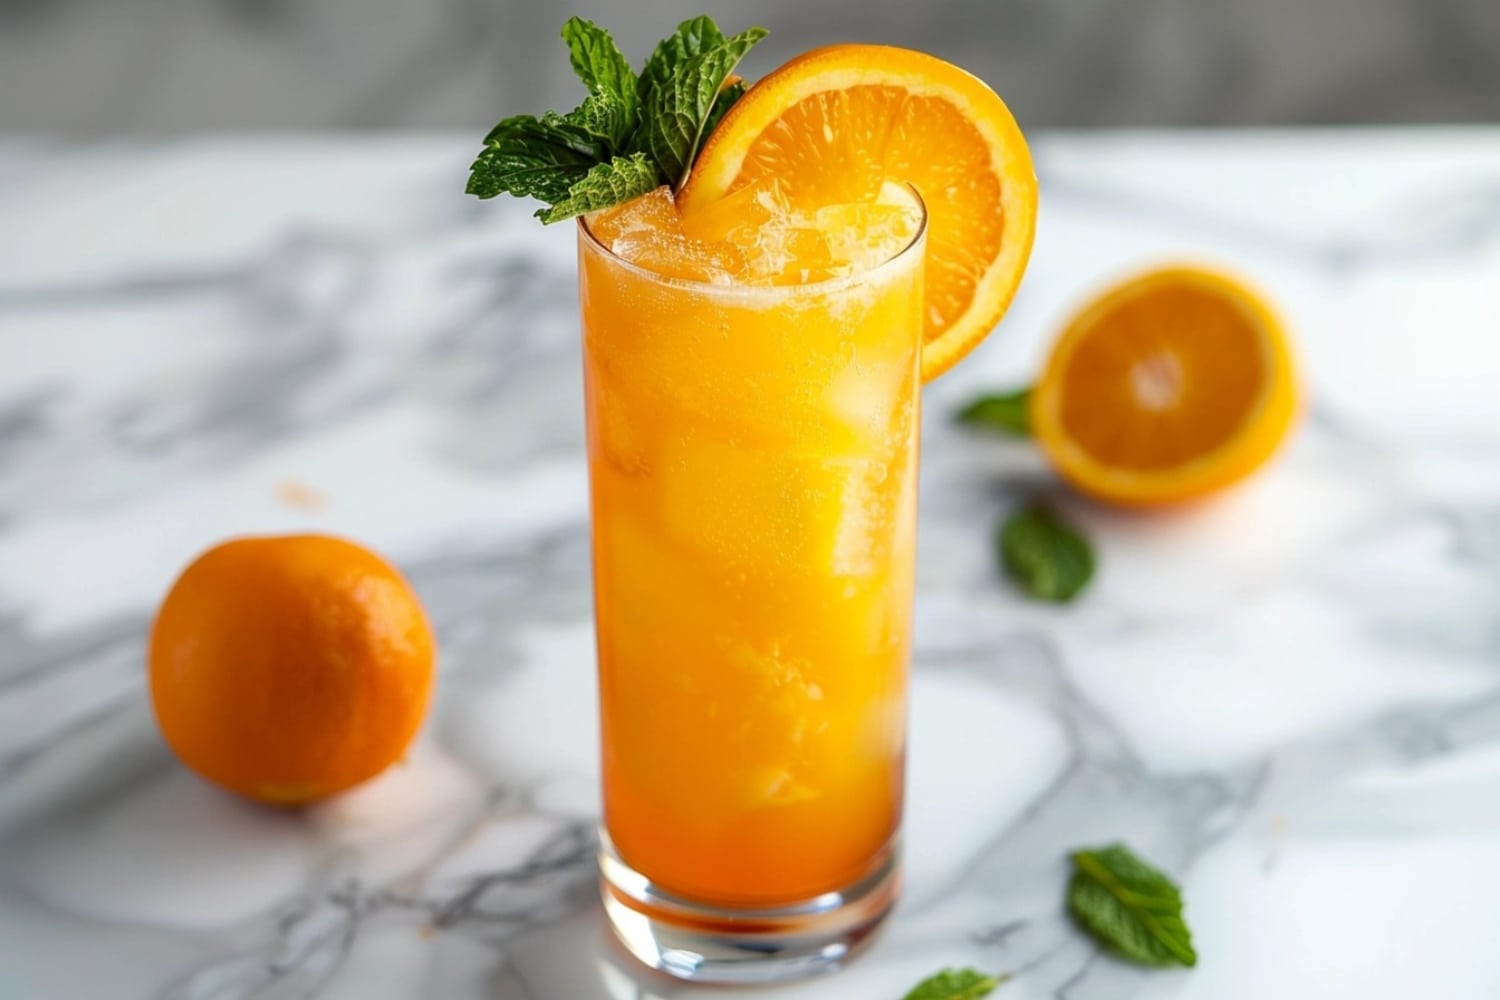 Orange crush cocktail on a high ball glass filled with ice garnished with mint sprig and orang slice.